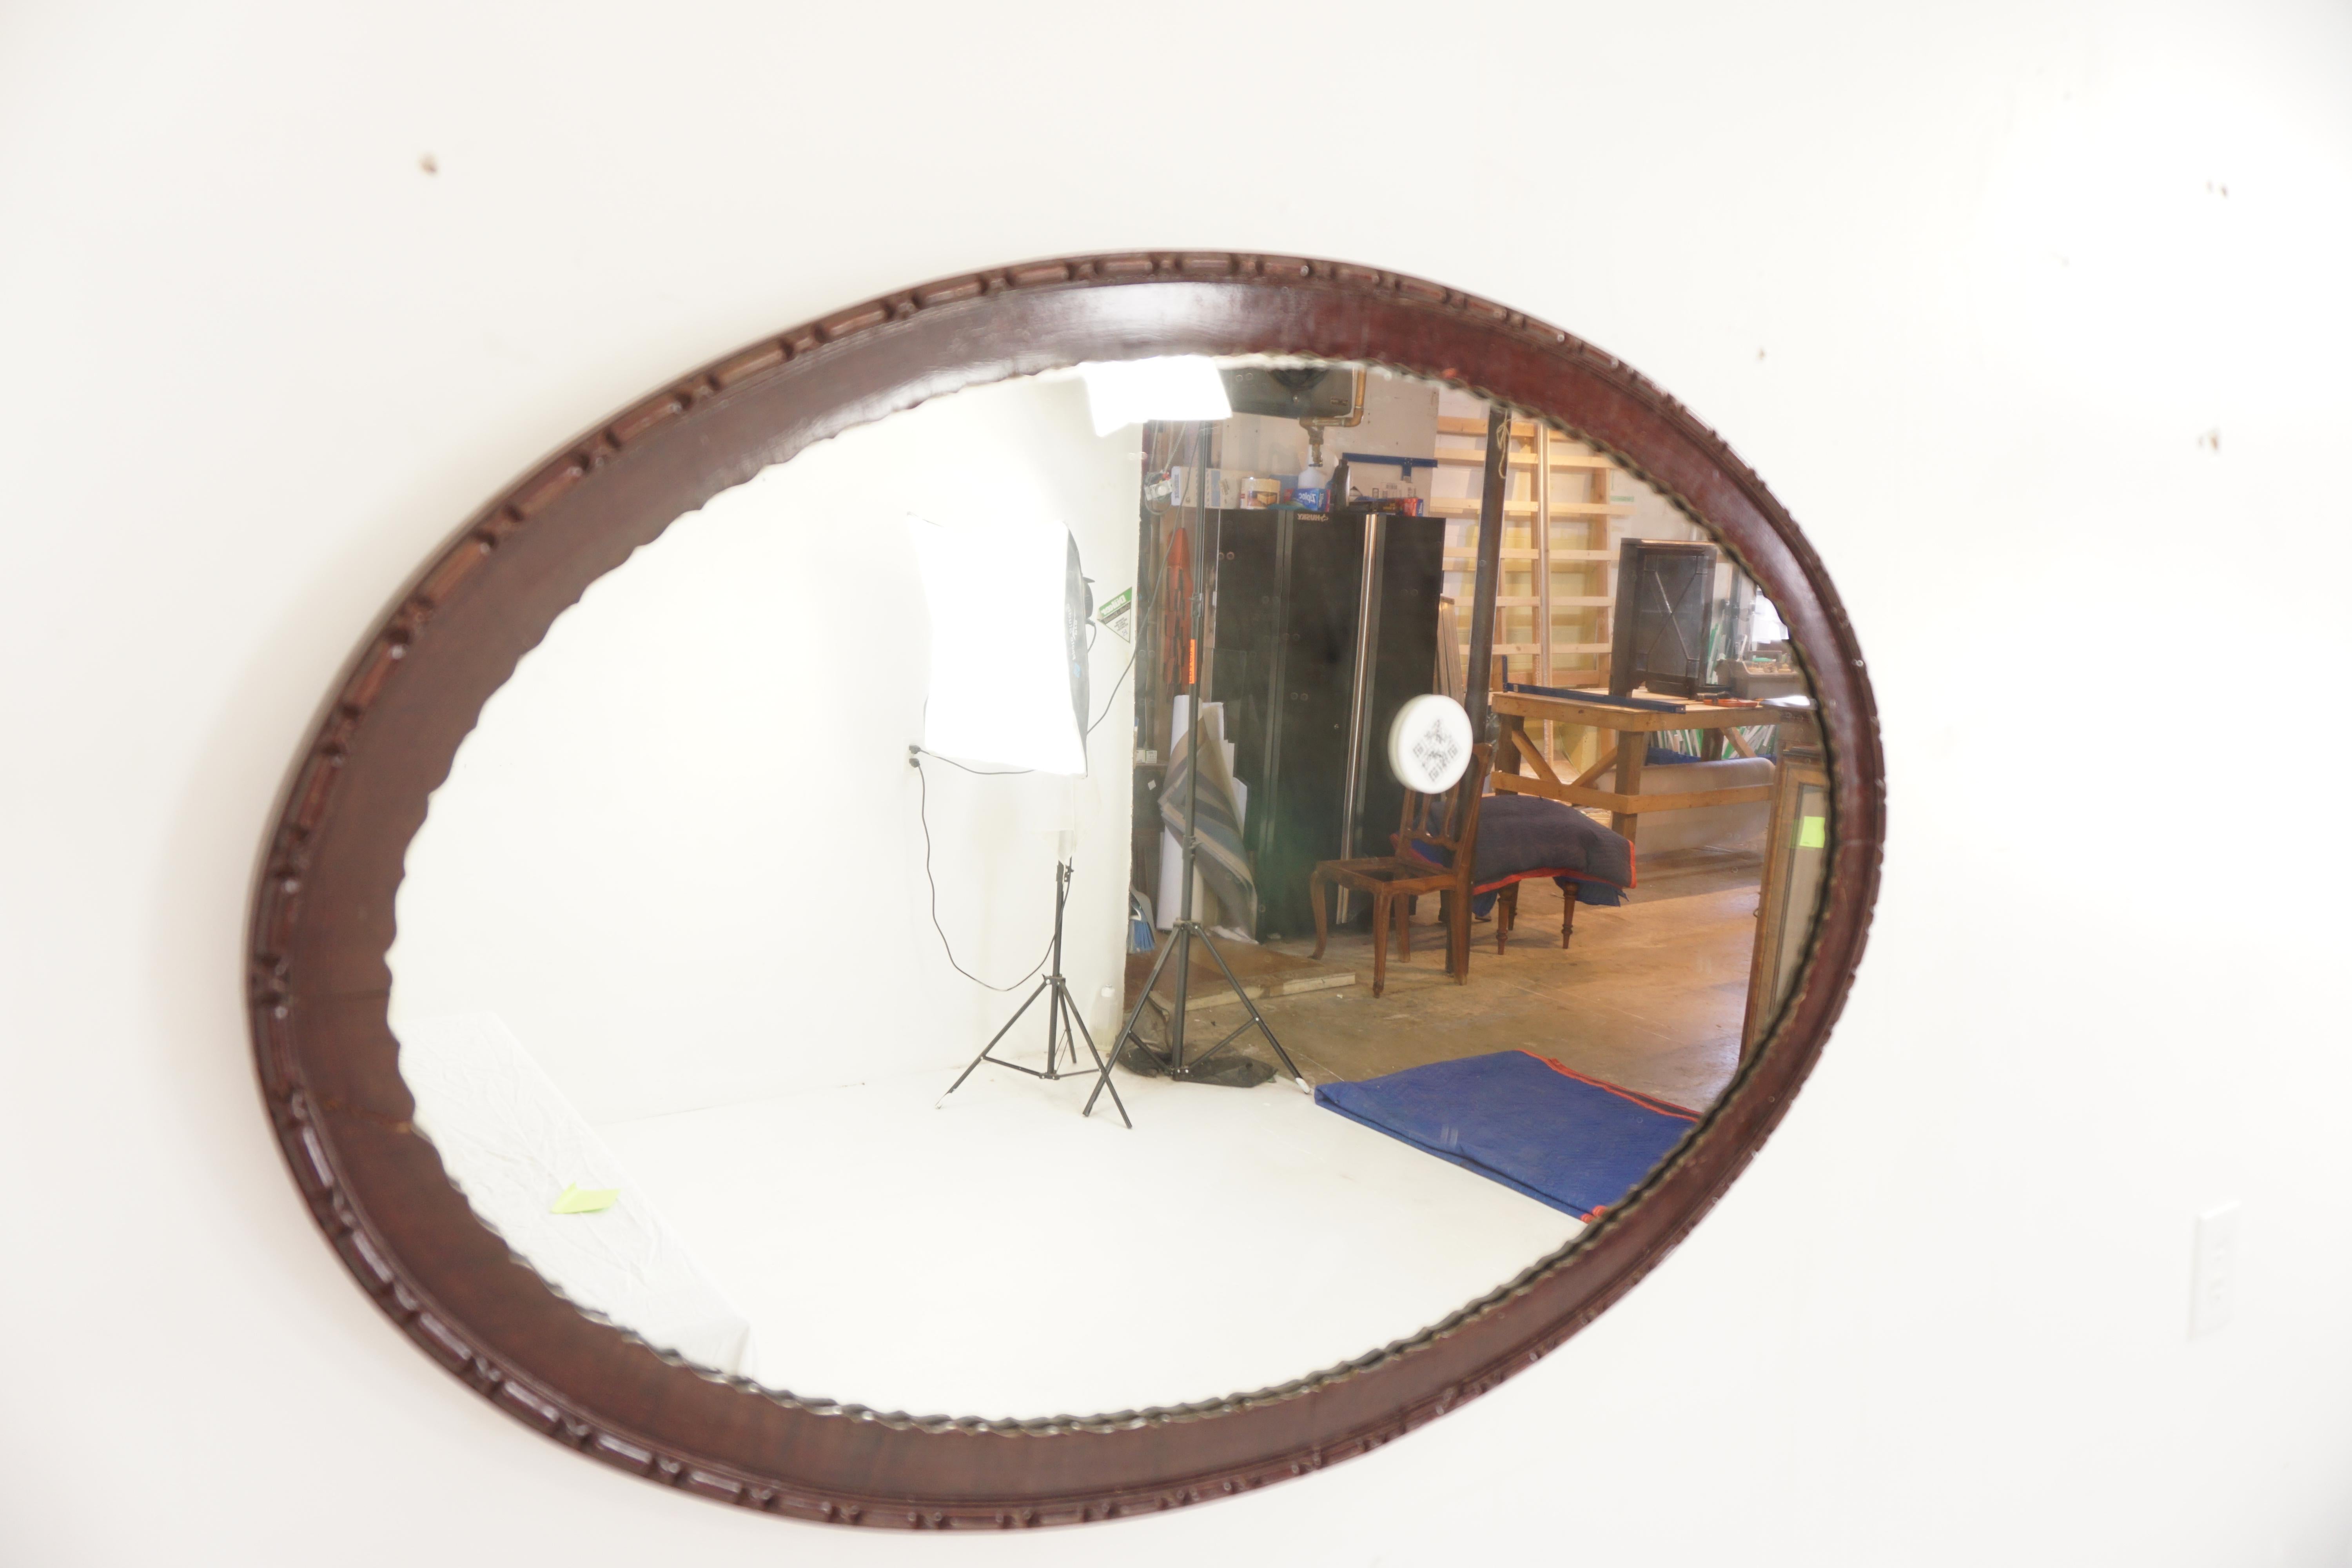 Vintage Oval Plaster of Paris wall hanging mirror, Scotland 1920, H498

Scotland 1920
Original Finish
Framed oval mirror with beading
Original mirror with wavy inside frame
Can be hung vertically on horizontally.
Please note cracks on the front of